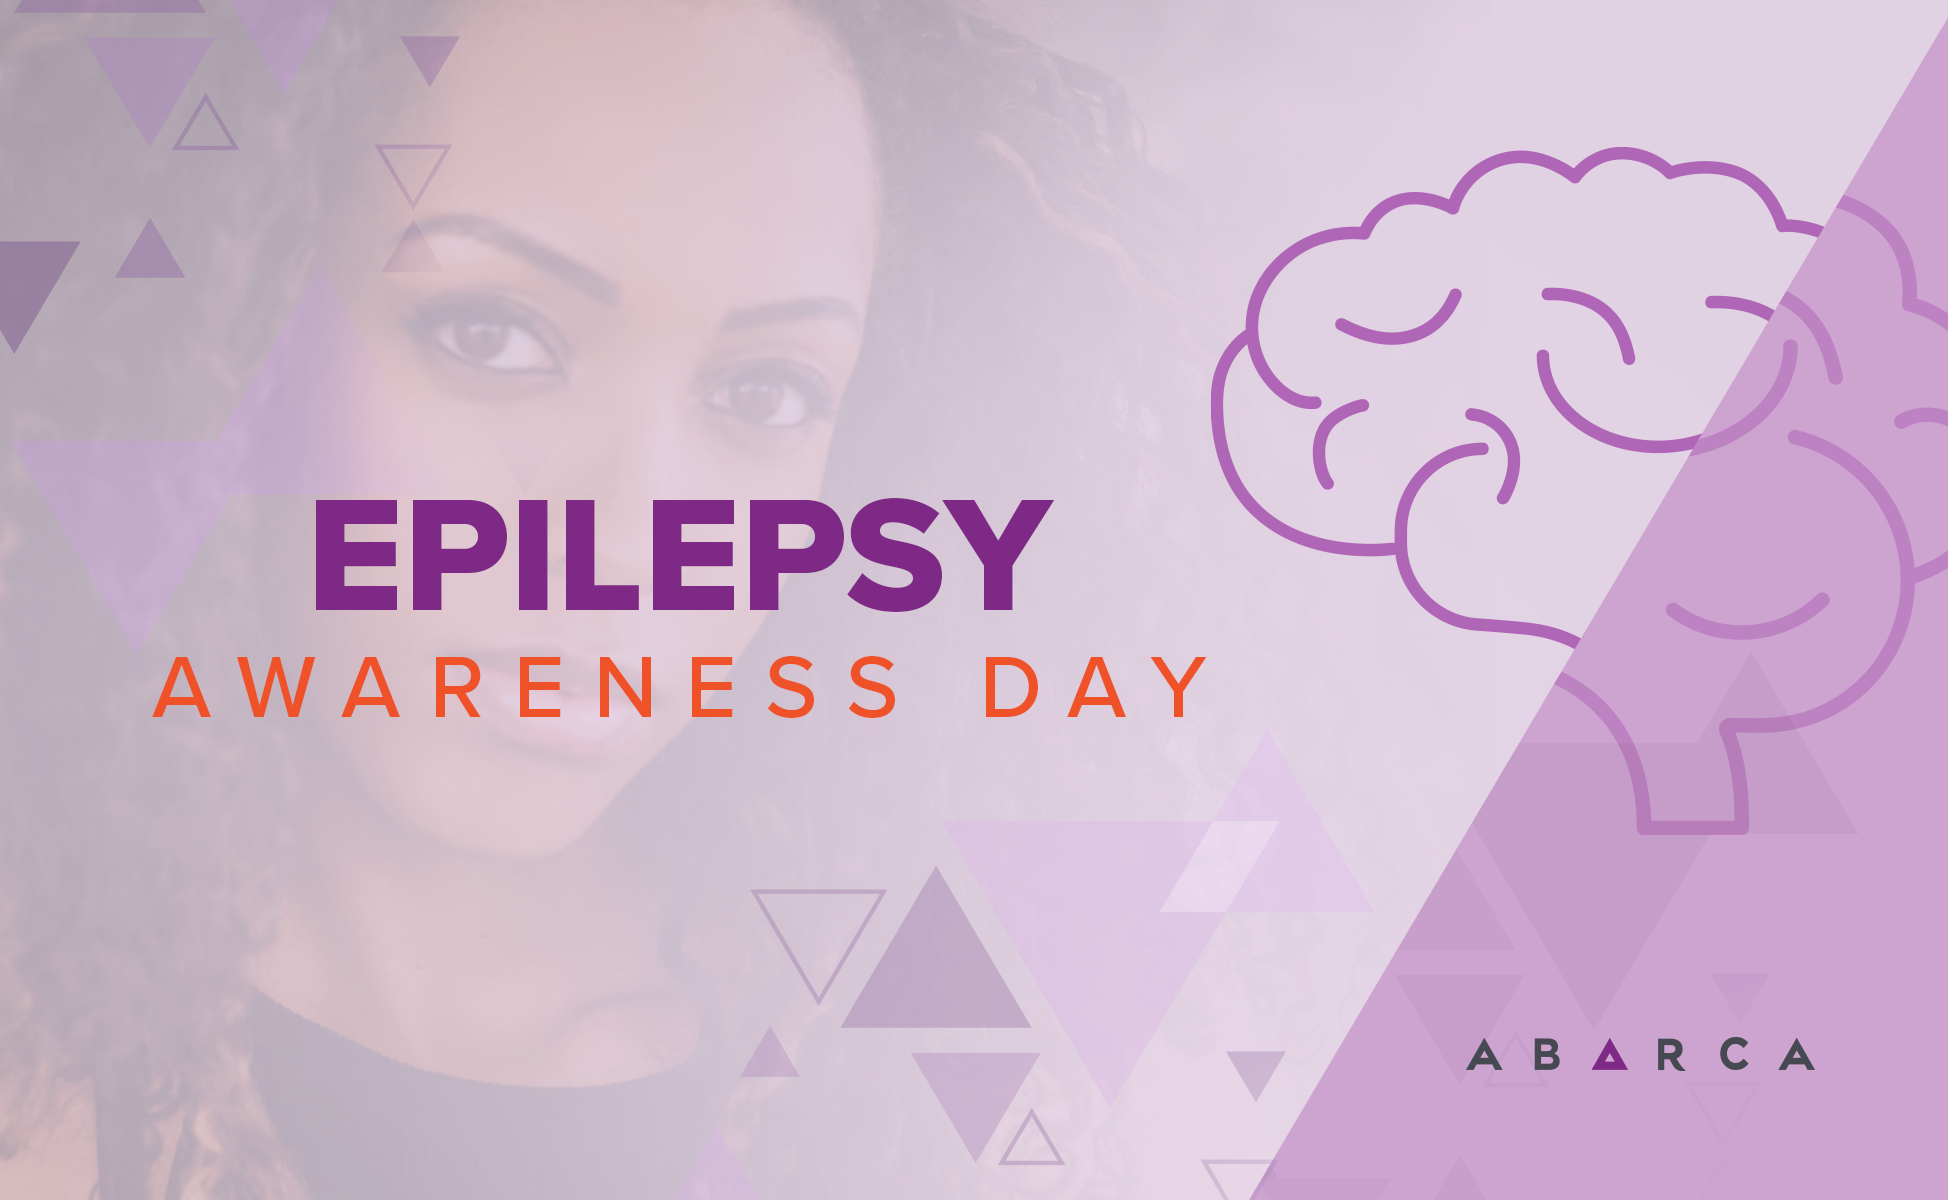 Epilepsy Awareness Day: Abarca is Shining a Spotlight on This Misunderstood Condition